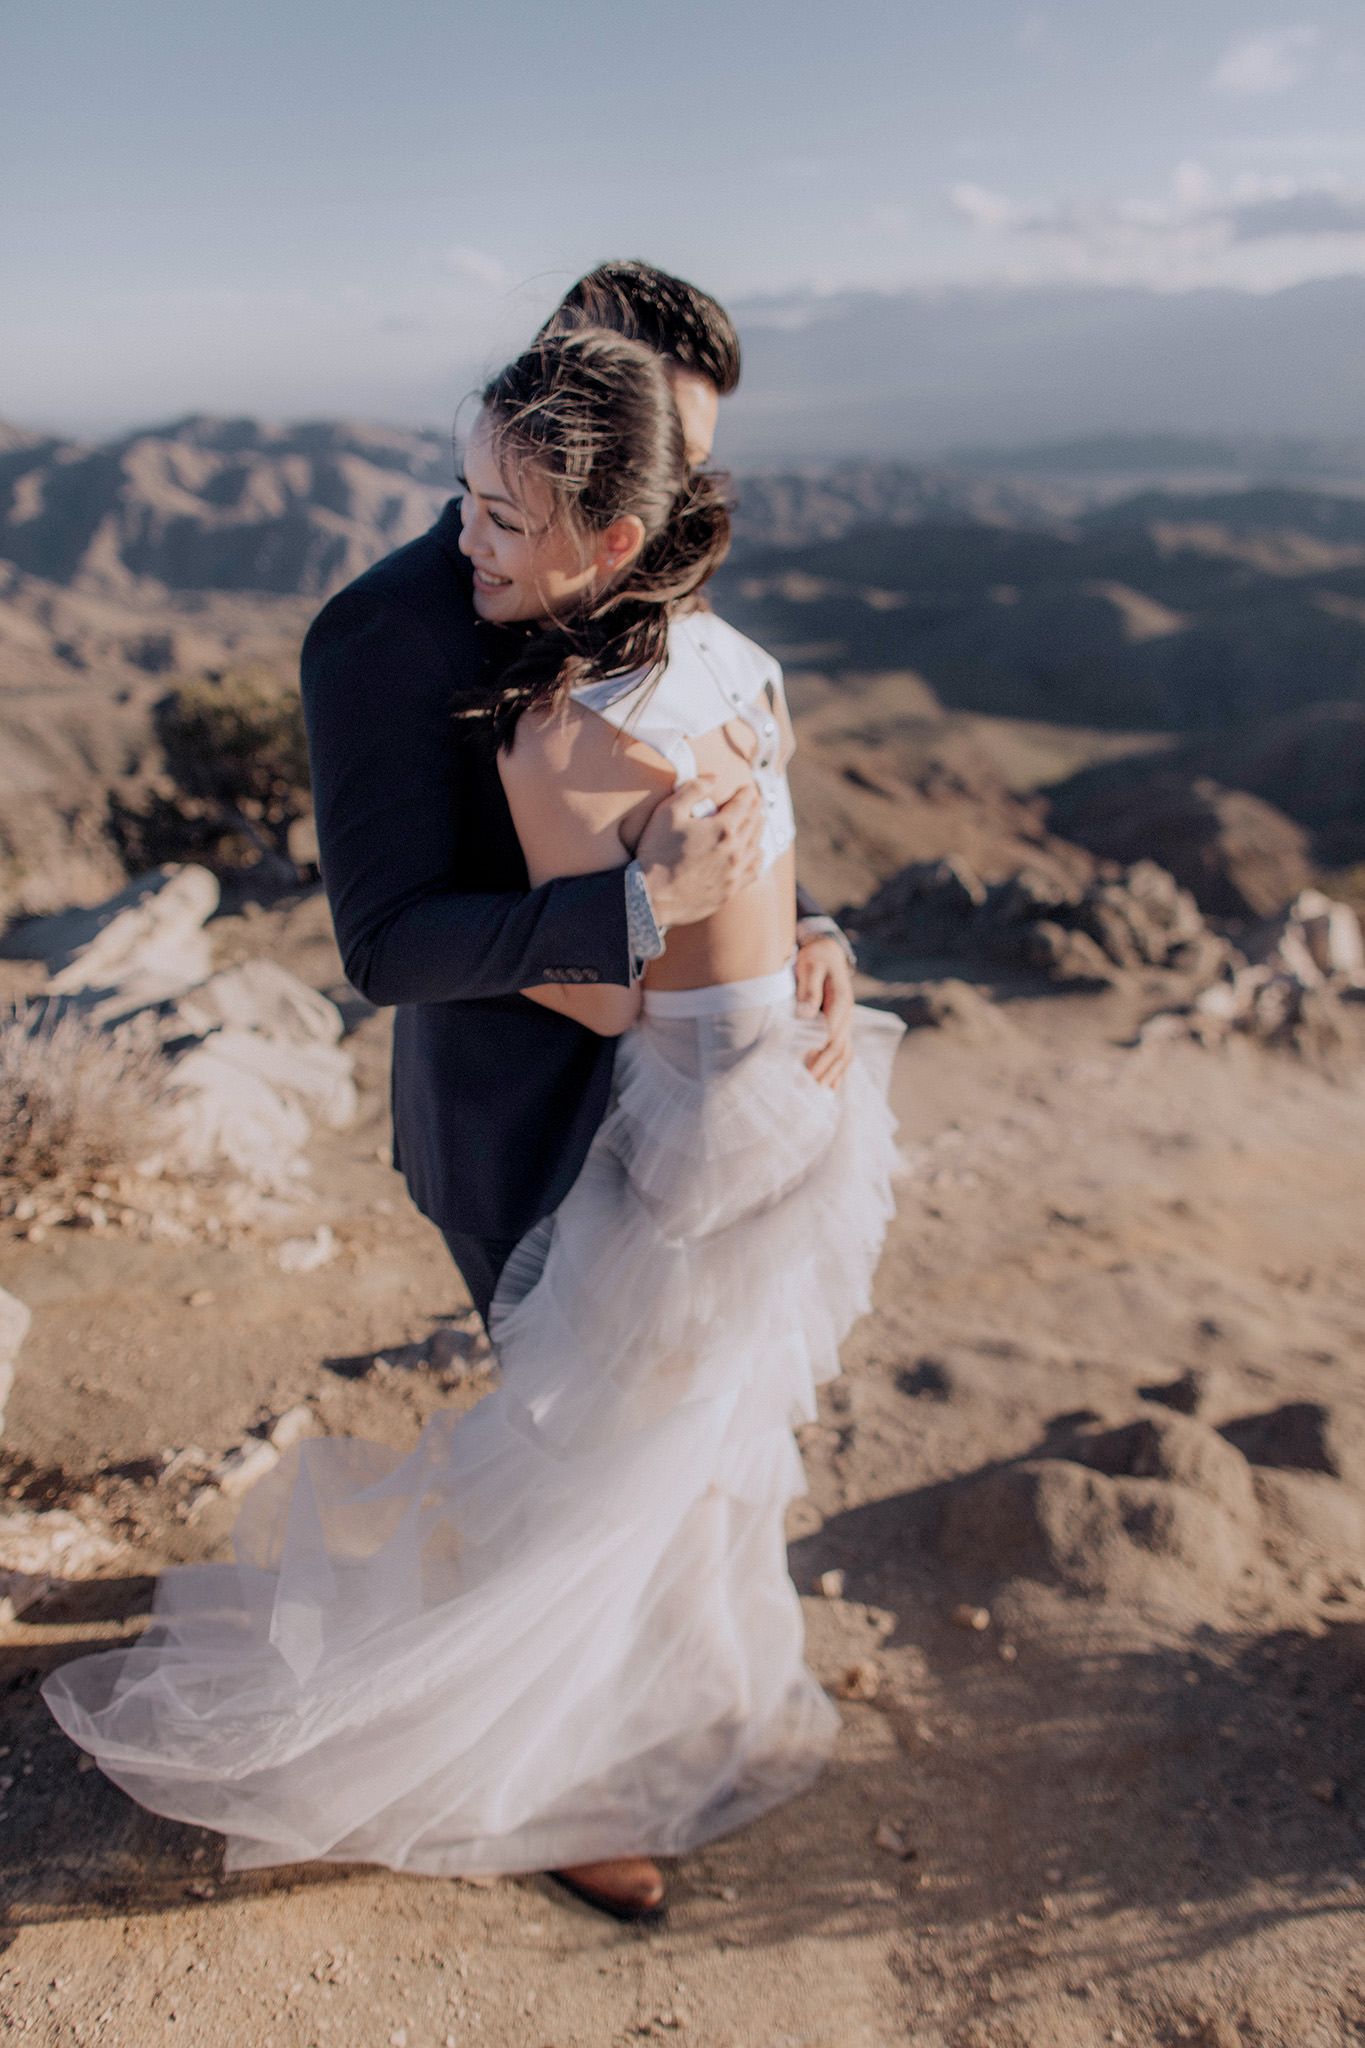 The engaged couple are hugging each other with mountains in the background. Spring engagement session outfit ideas. Image by Jenny Fu